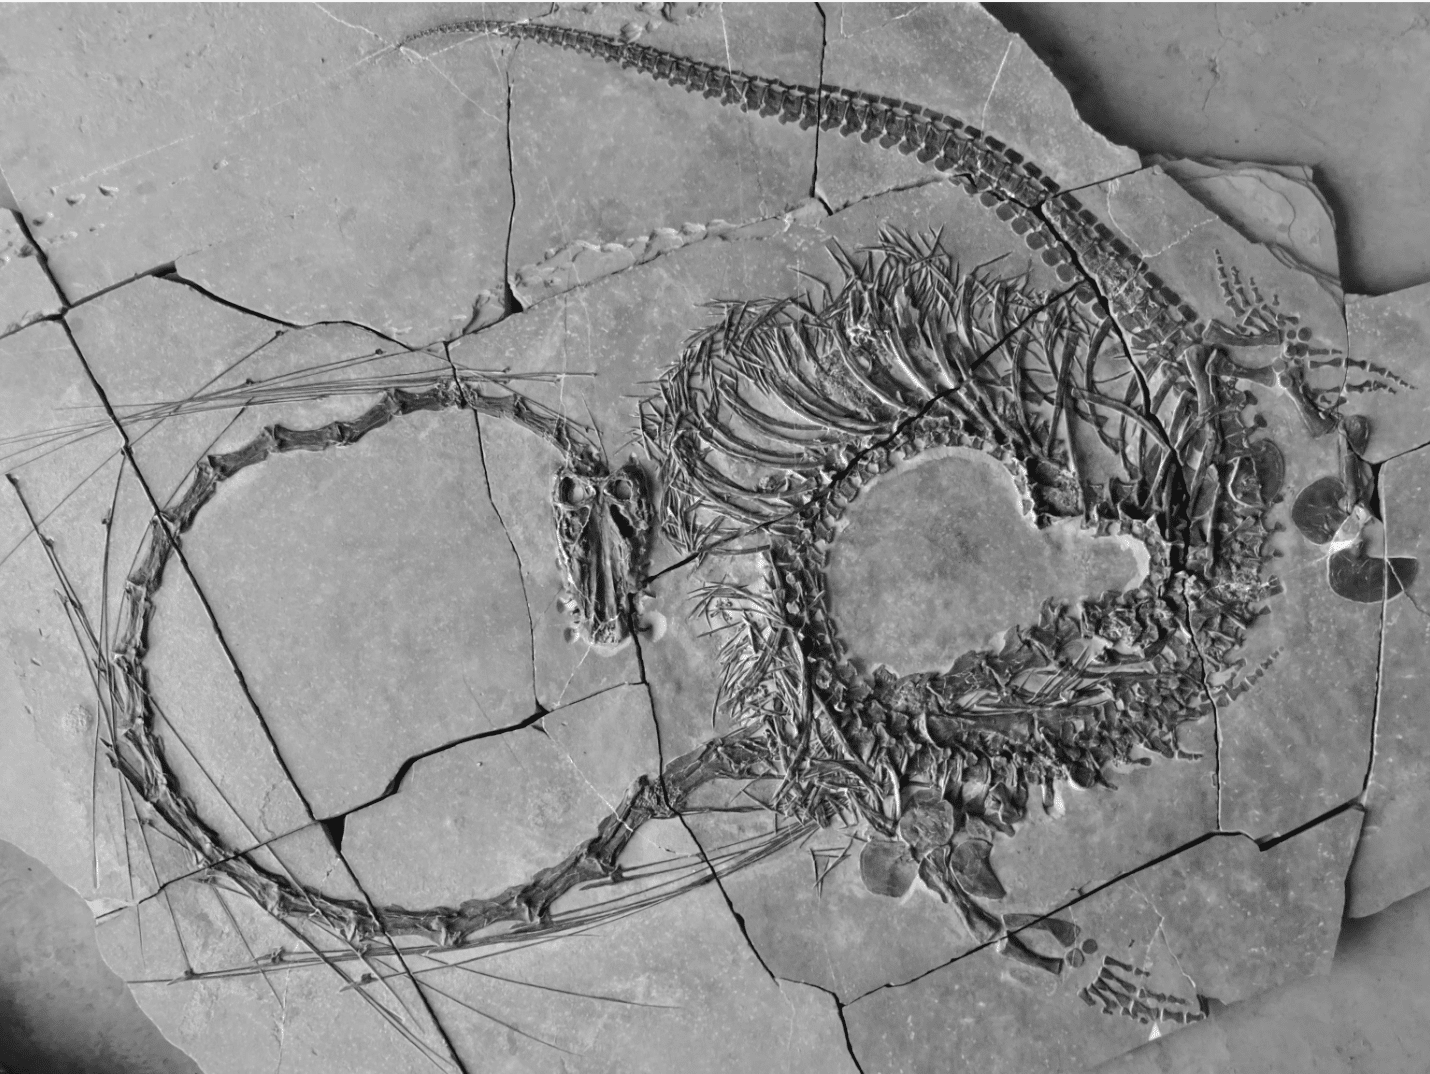 Scientists discover ‘very strange’ 240-million-year-old ‘Chinese dragon’ fossil